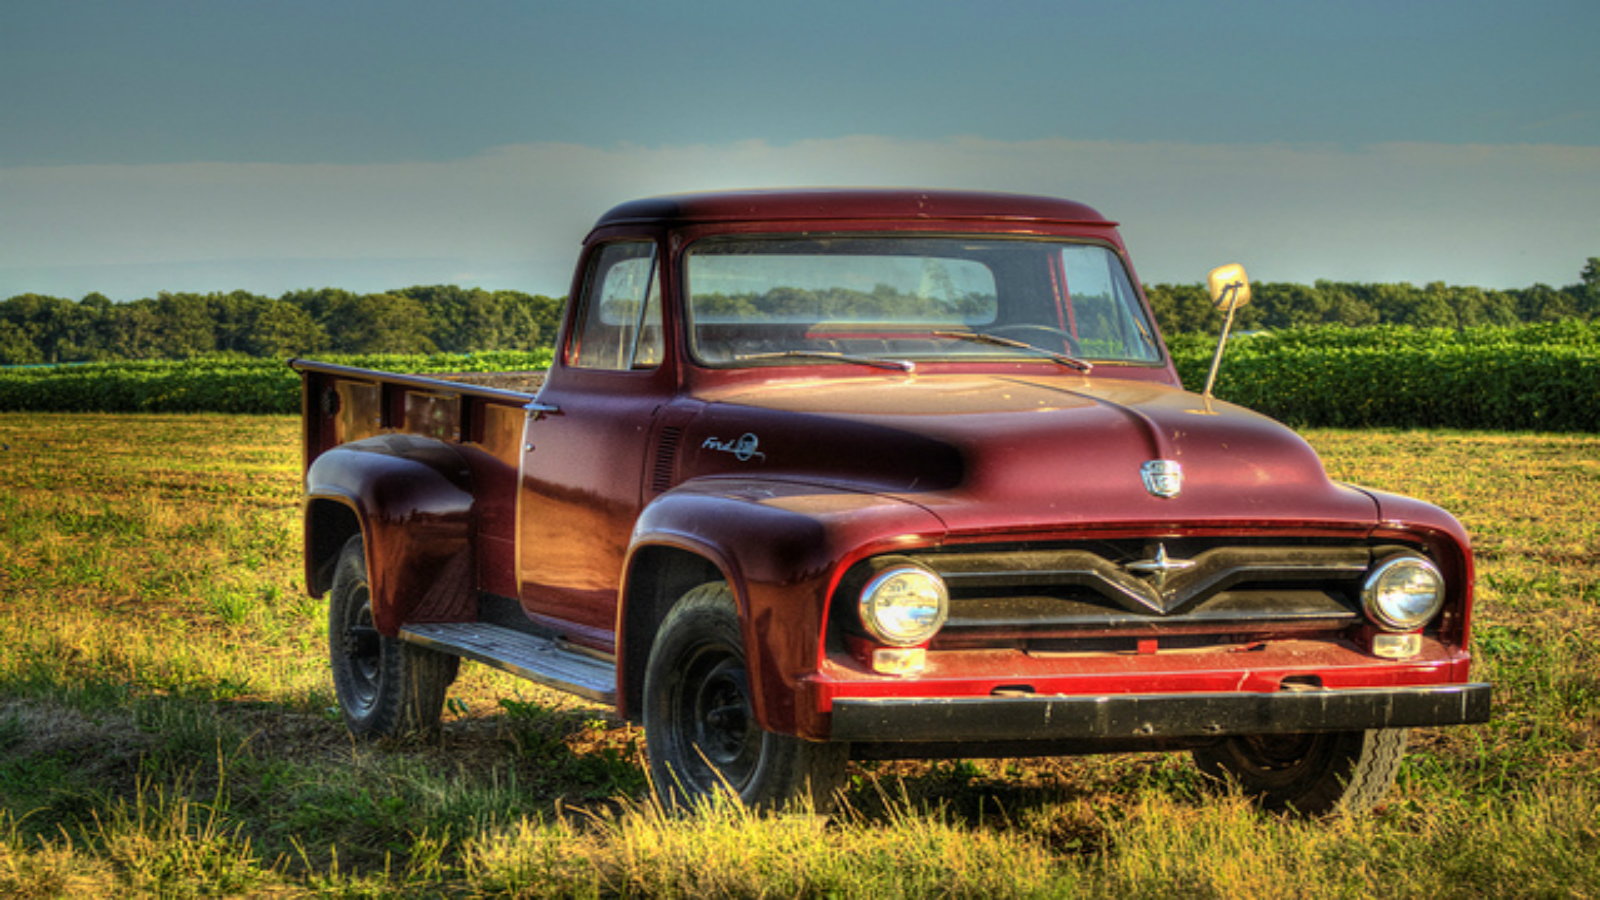 5 Things to Look at When Buying a Vintage Ford Truck